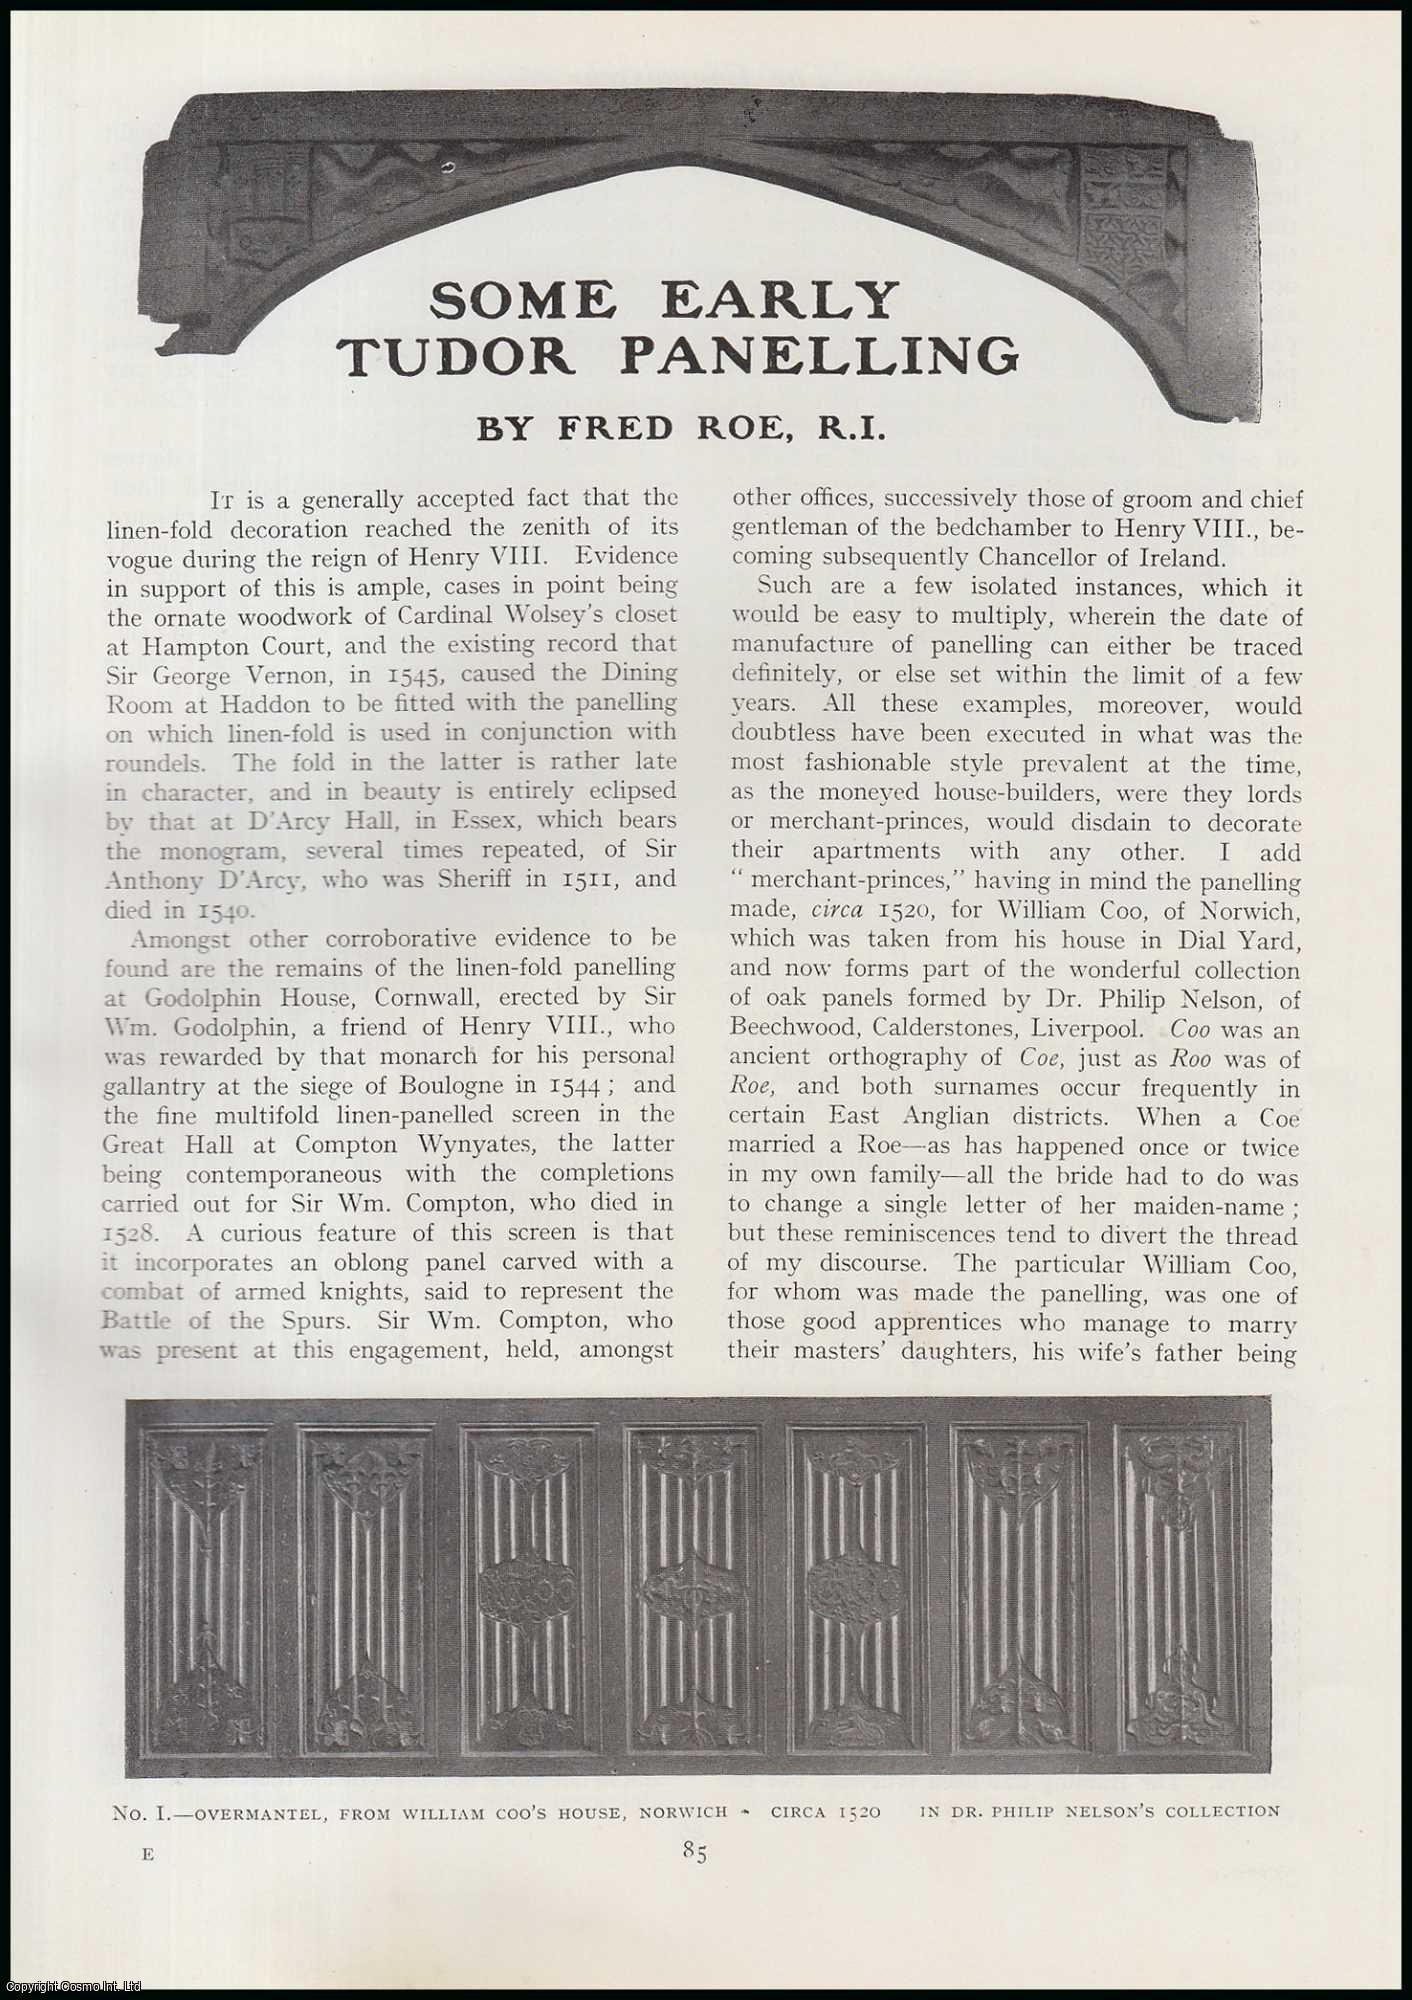 Fred Roe - Some Early Tudor Panelling. An original article from The Connoisseur, 1922.